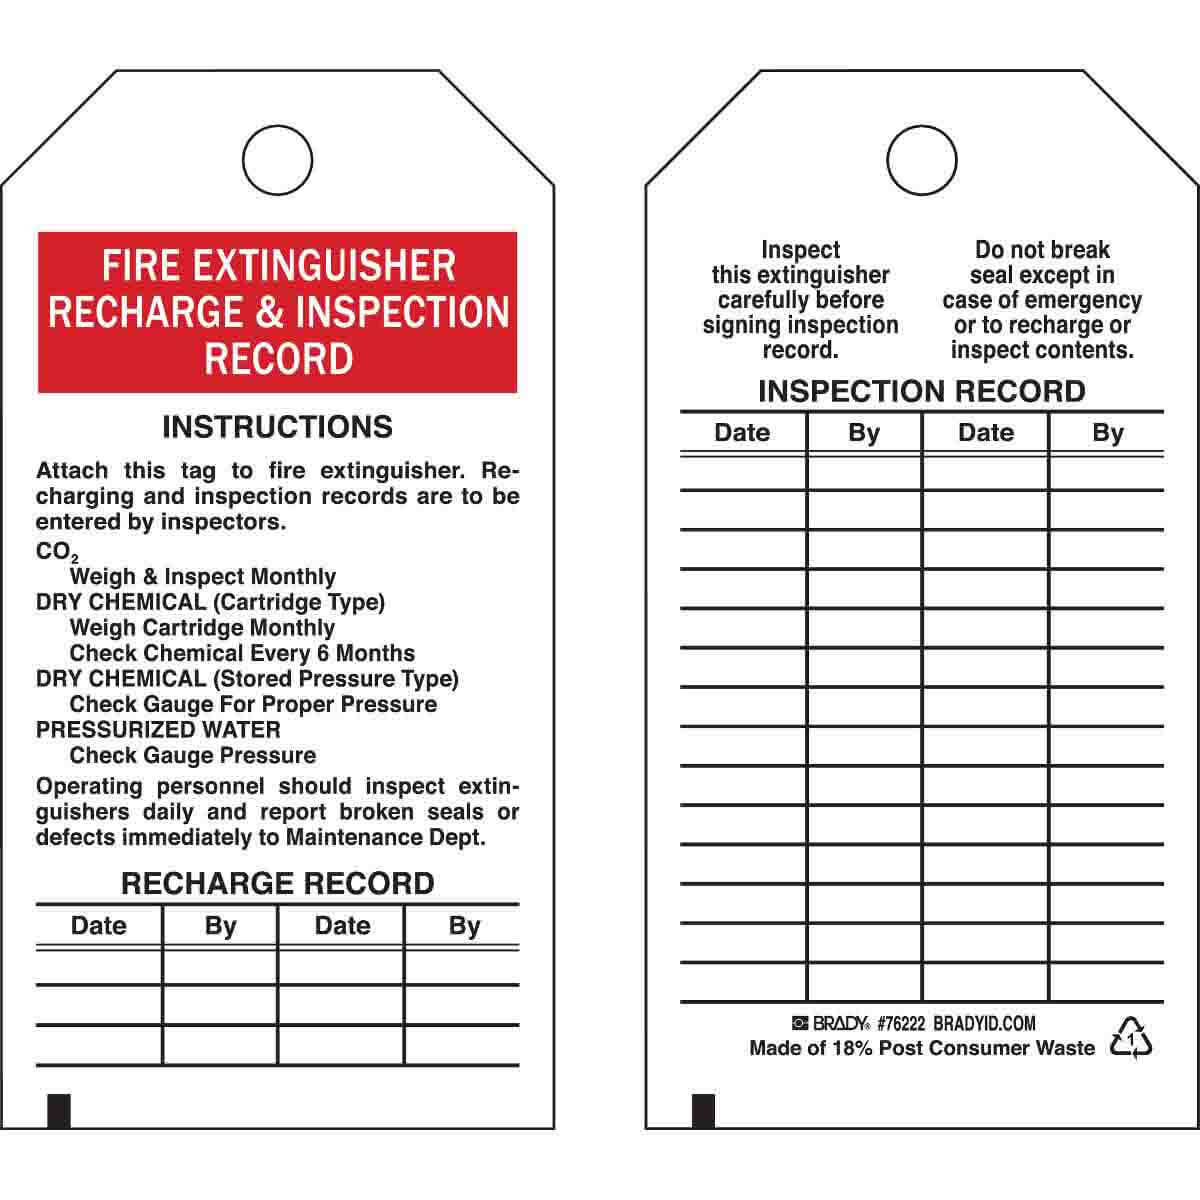 Fire Extinguisher Recharge And Inspection Record Tags Regarding Fire Extinguisher Certificate Template